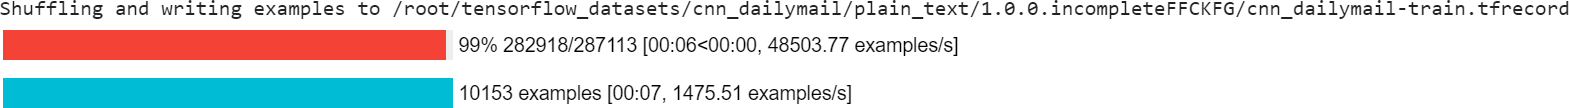 Downloading the cnn_dailymail dataset as a TFRecord file